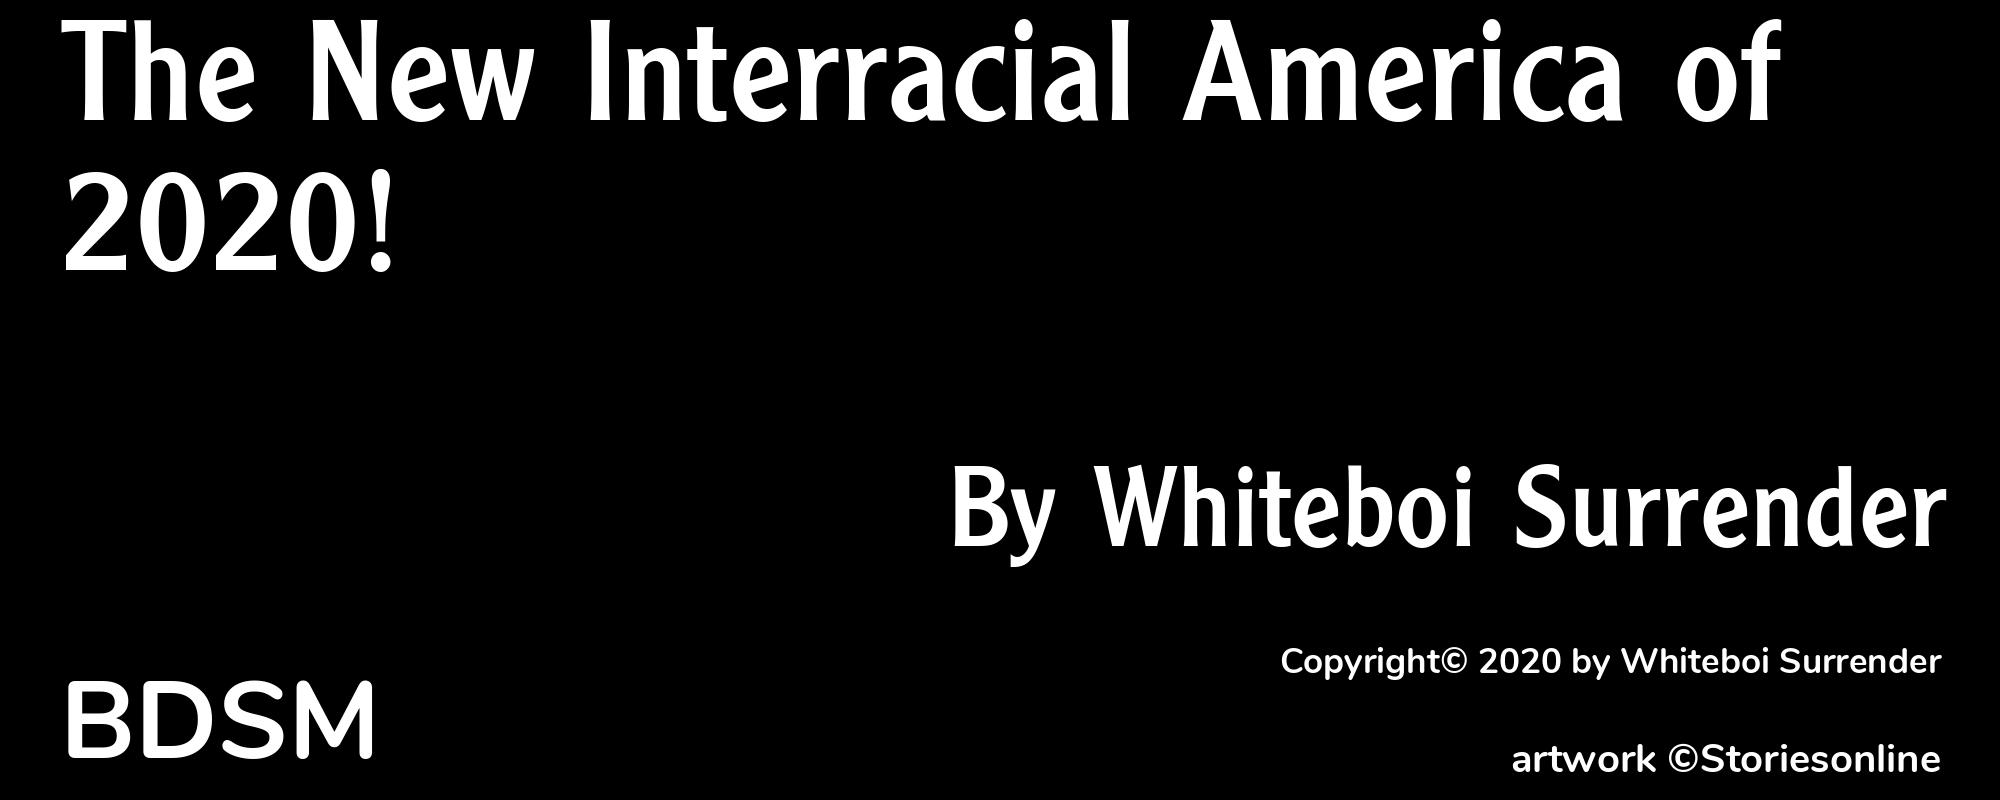 The New Interracial America of 2020! - Cover